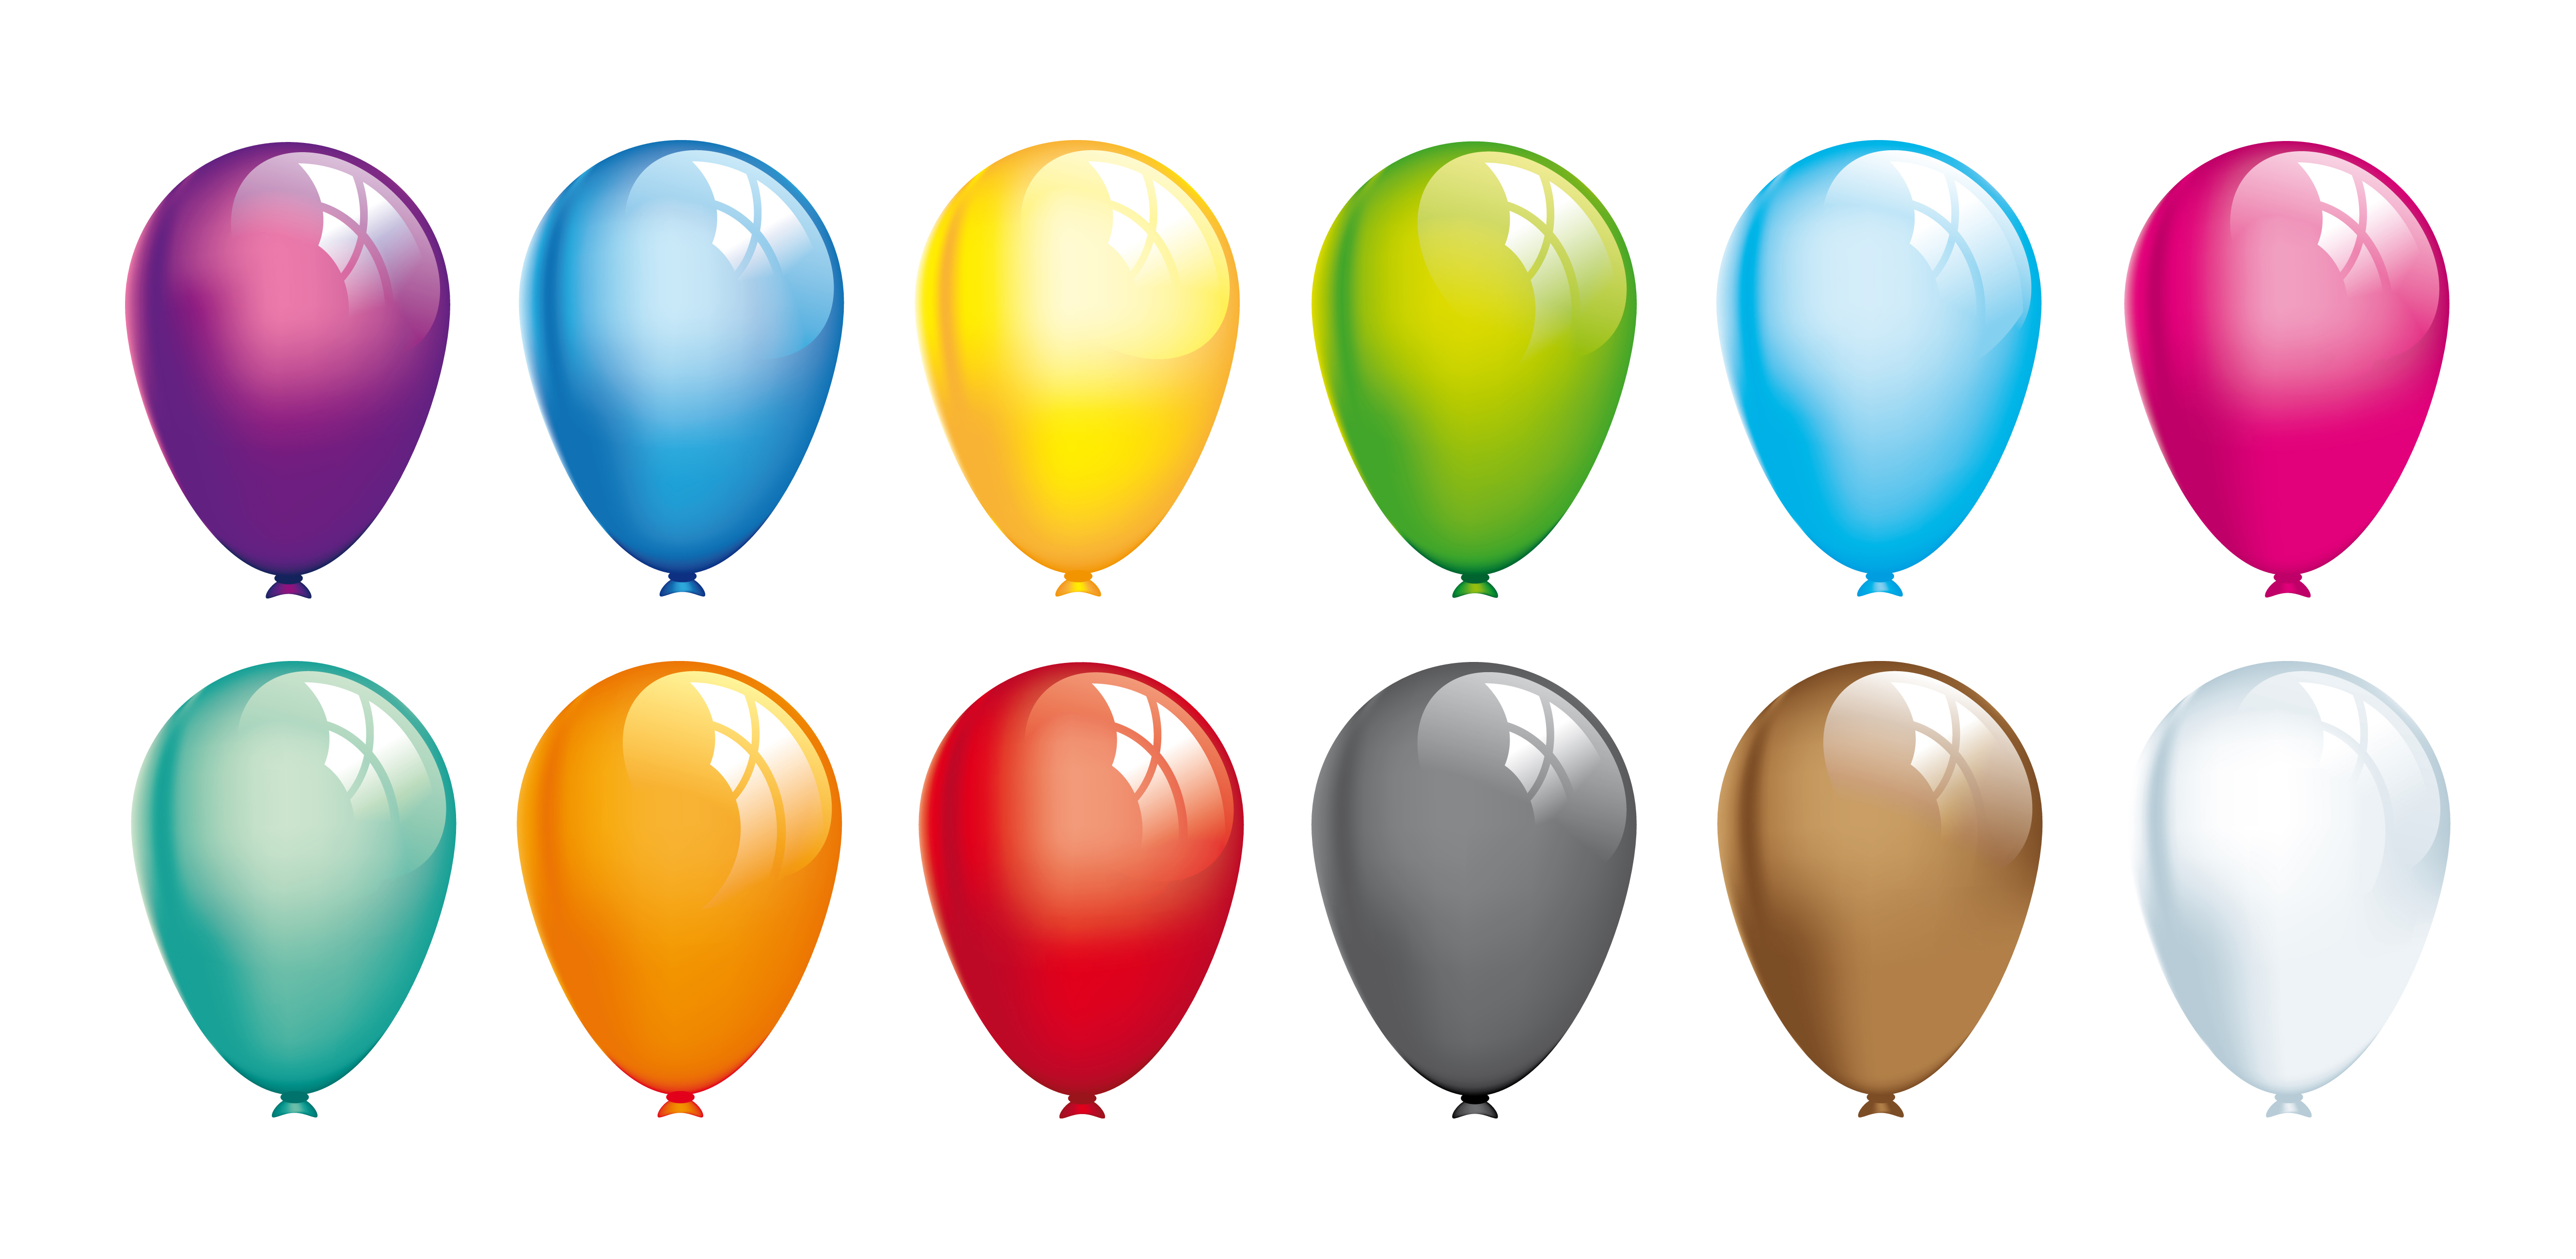 Balloons Vector by StooStock on Clipart library